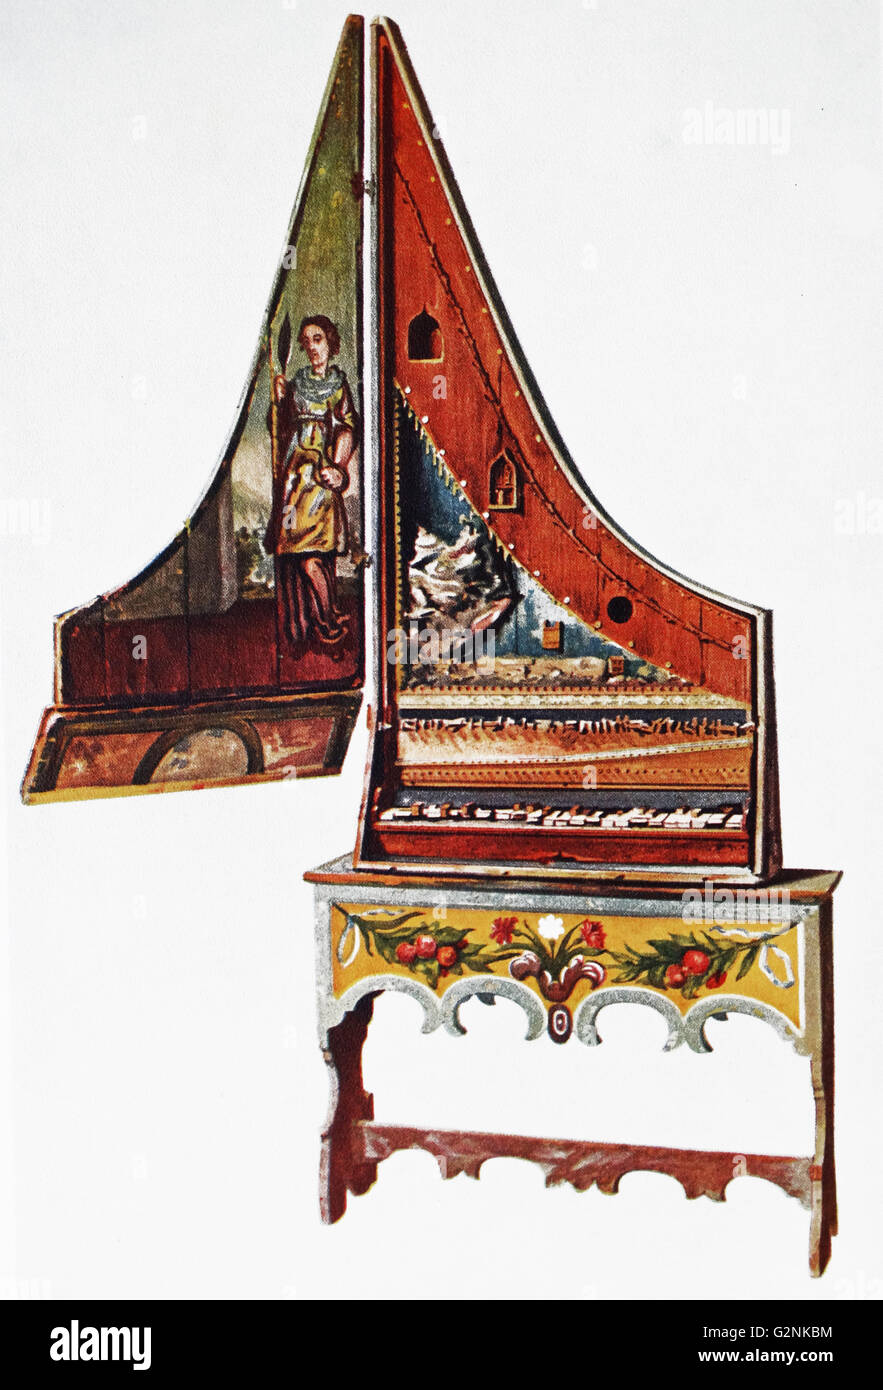 Clavicytherium or Upright Spinet. Thought to have originated from Northern Italy or South Germany, this instrument is one of the oldest spinet or keyboard stringed instruments existing - dating back to the first years of the sixteenth century. Stock Photo